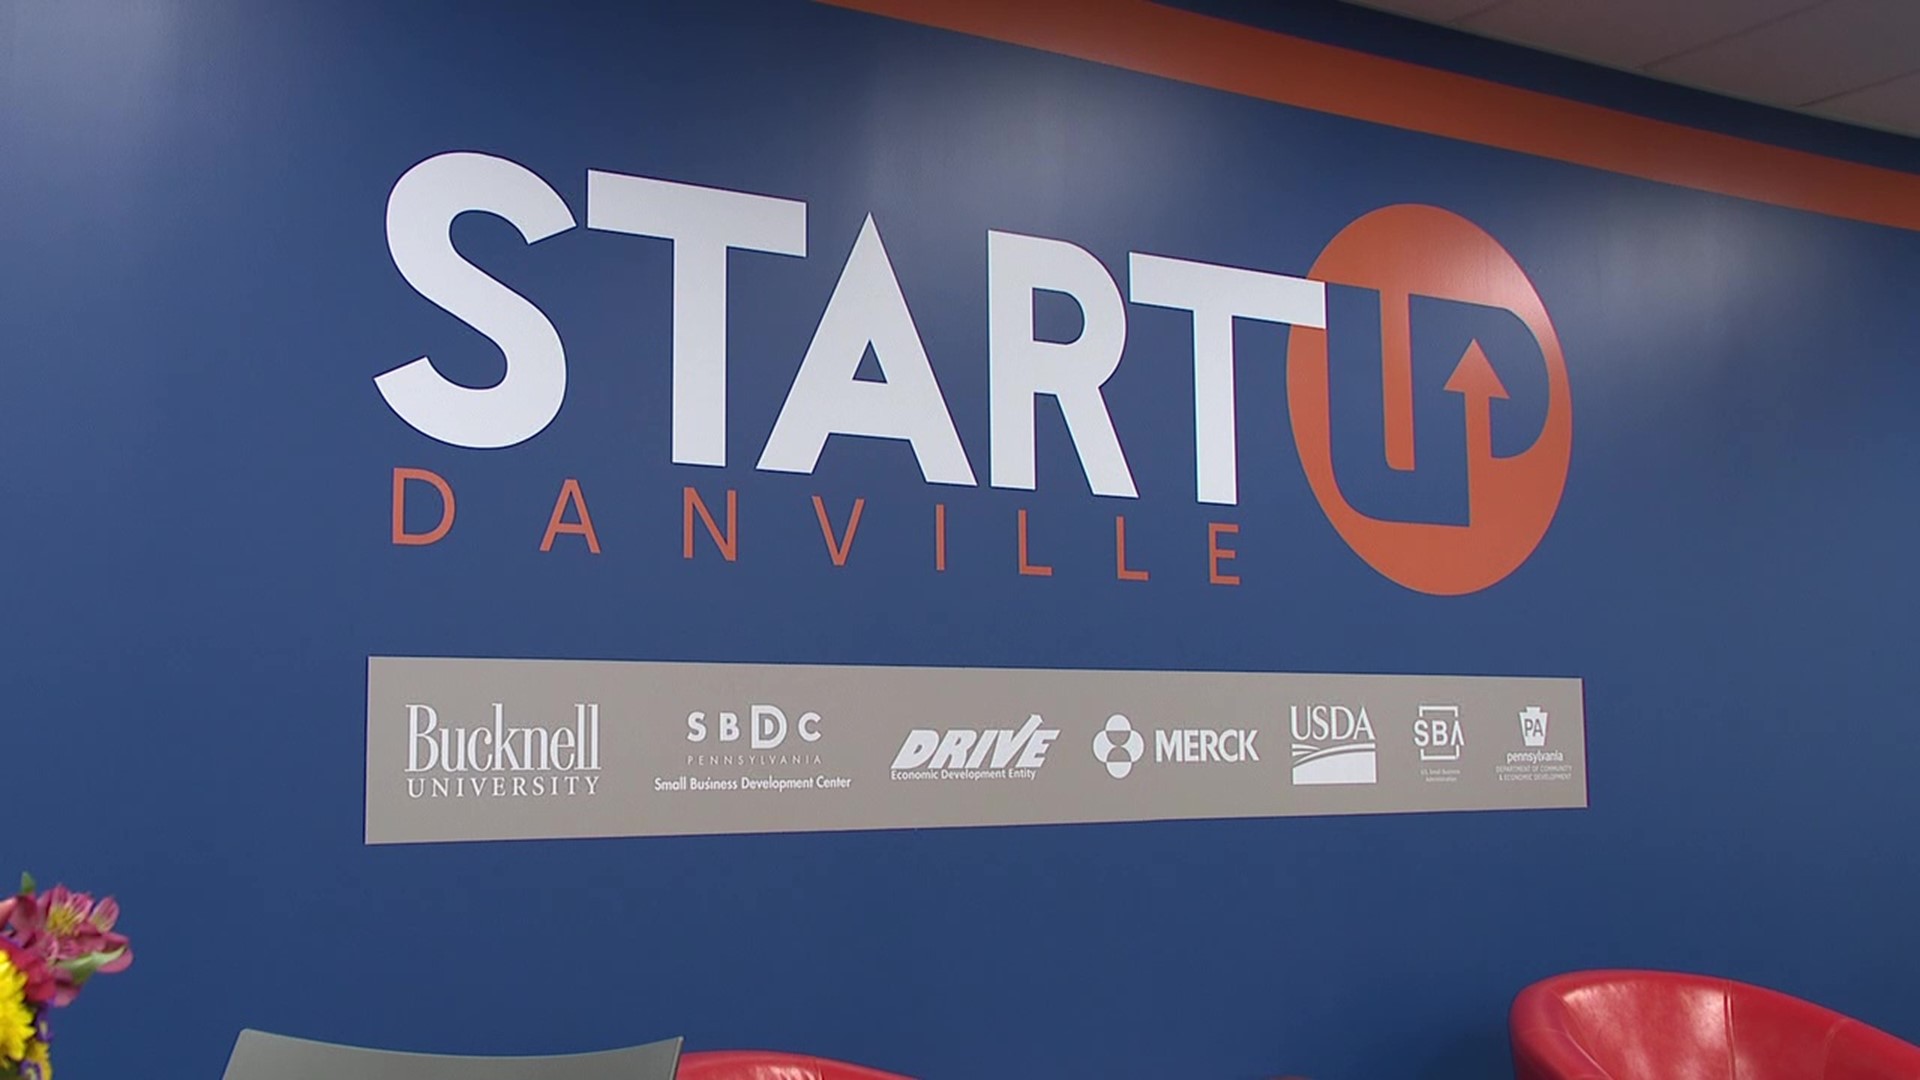 Bucknell has helped dozens of businesses since opening its incubator ten years ago.